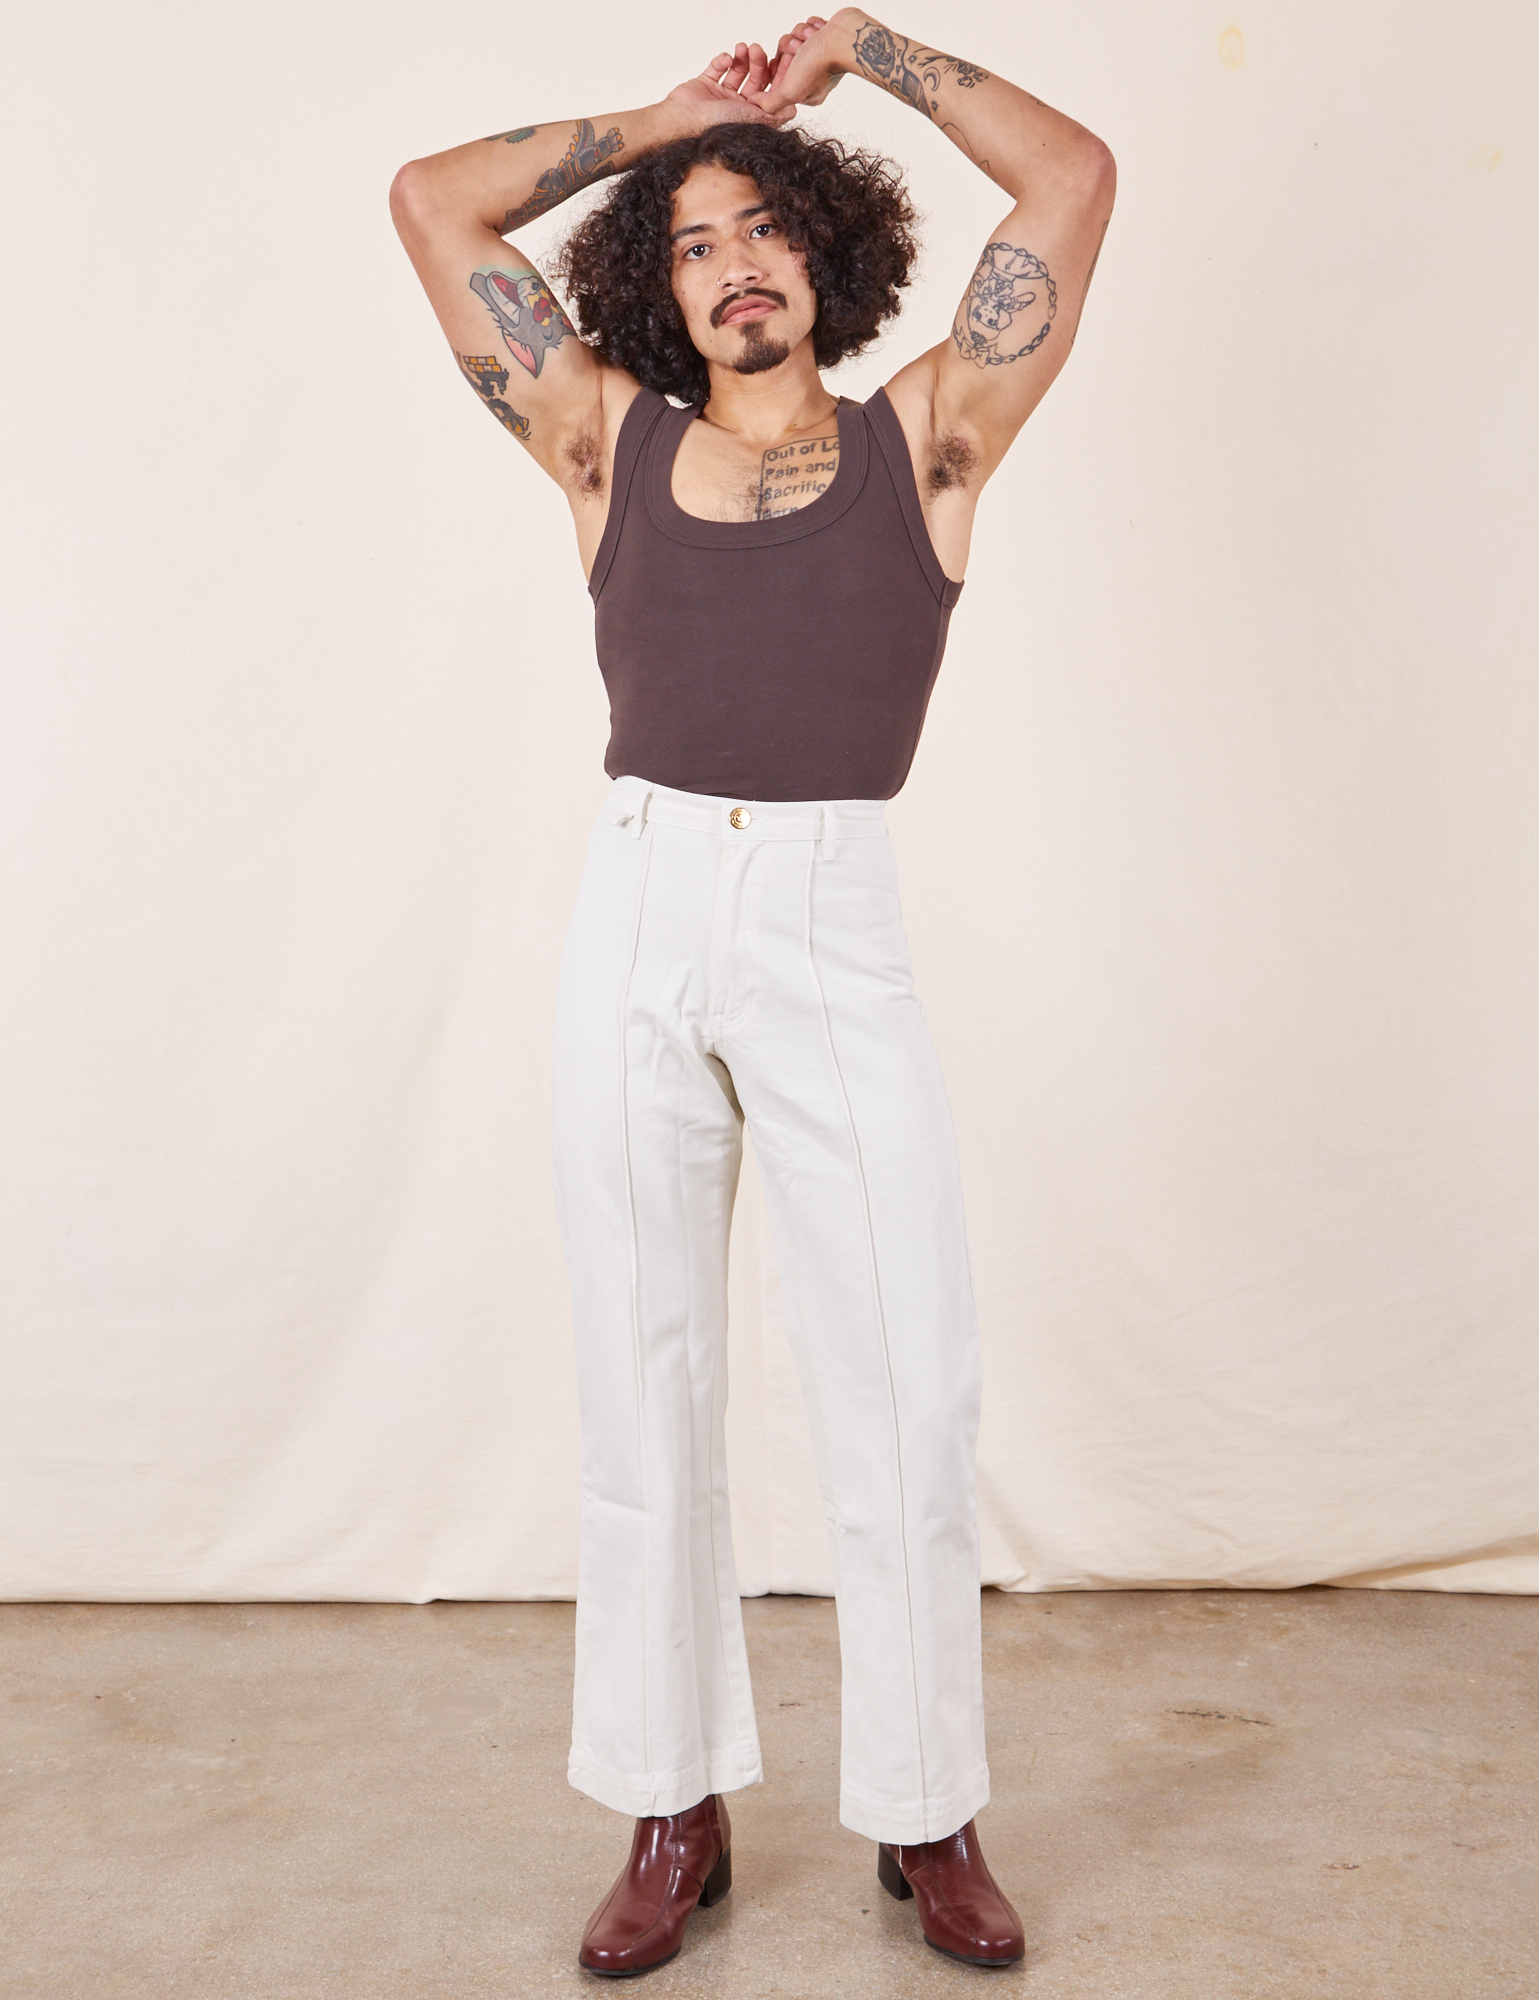 Jesse is wearing Western Pants in Vintage Tee Off-White and an espresso brown Tank Top